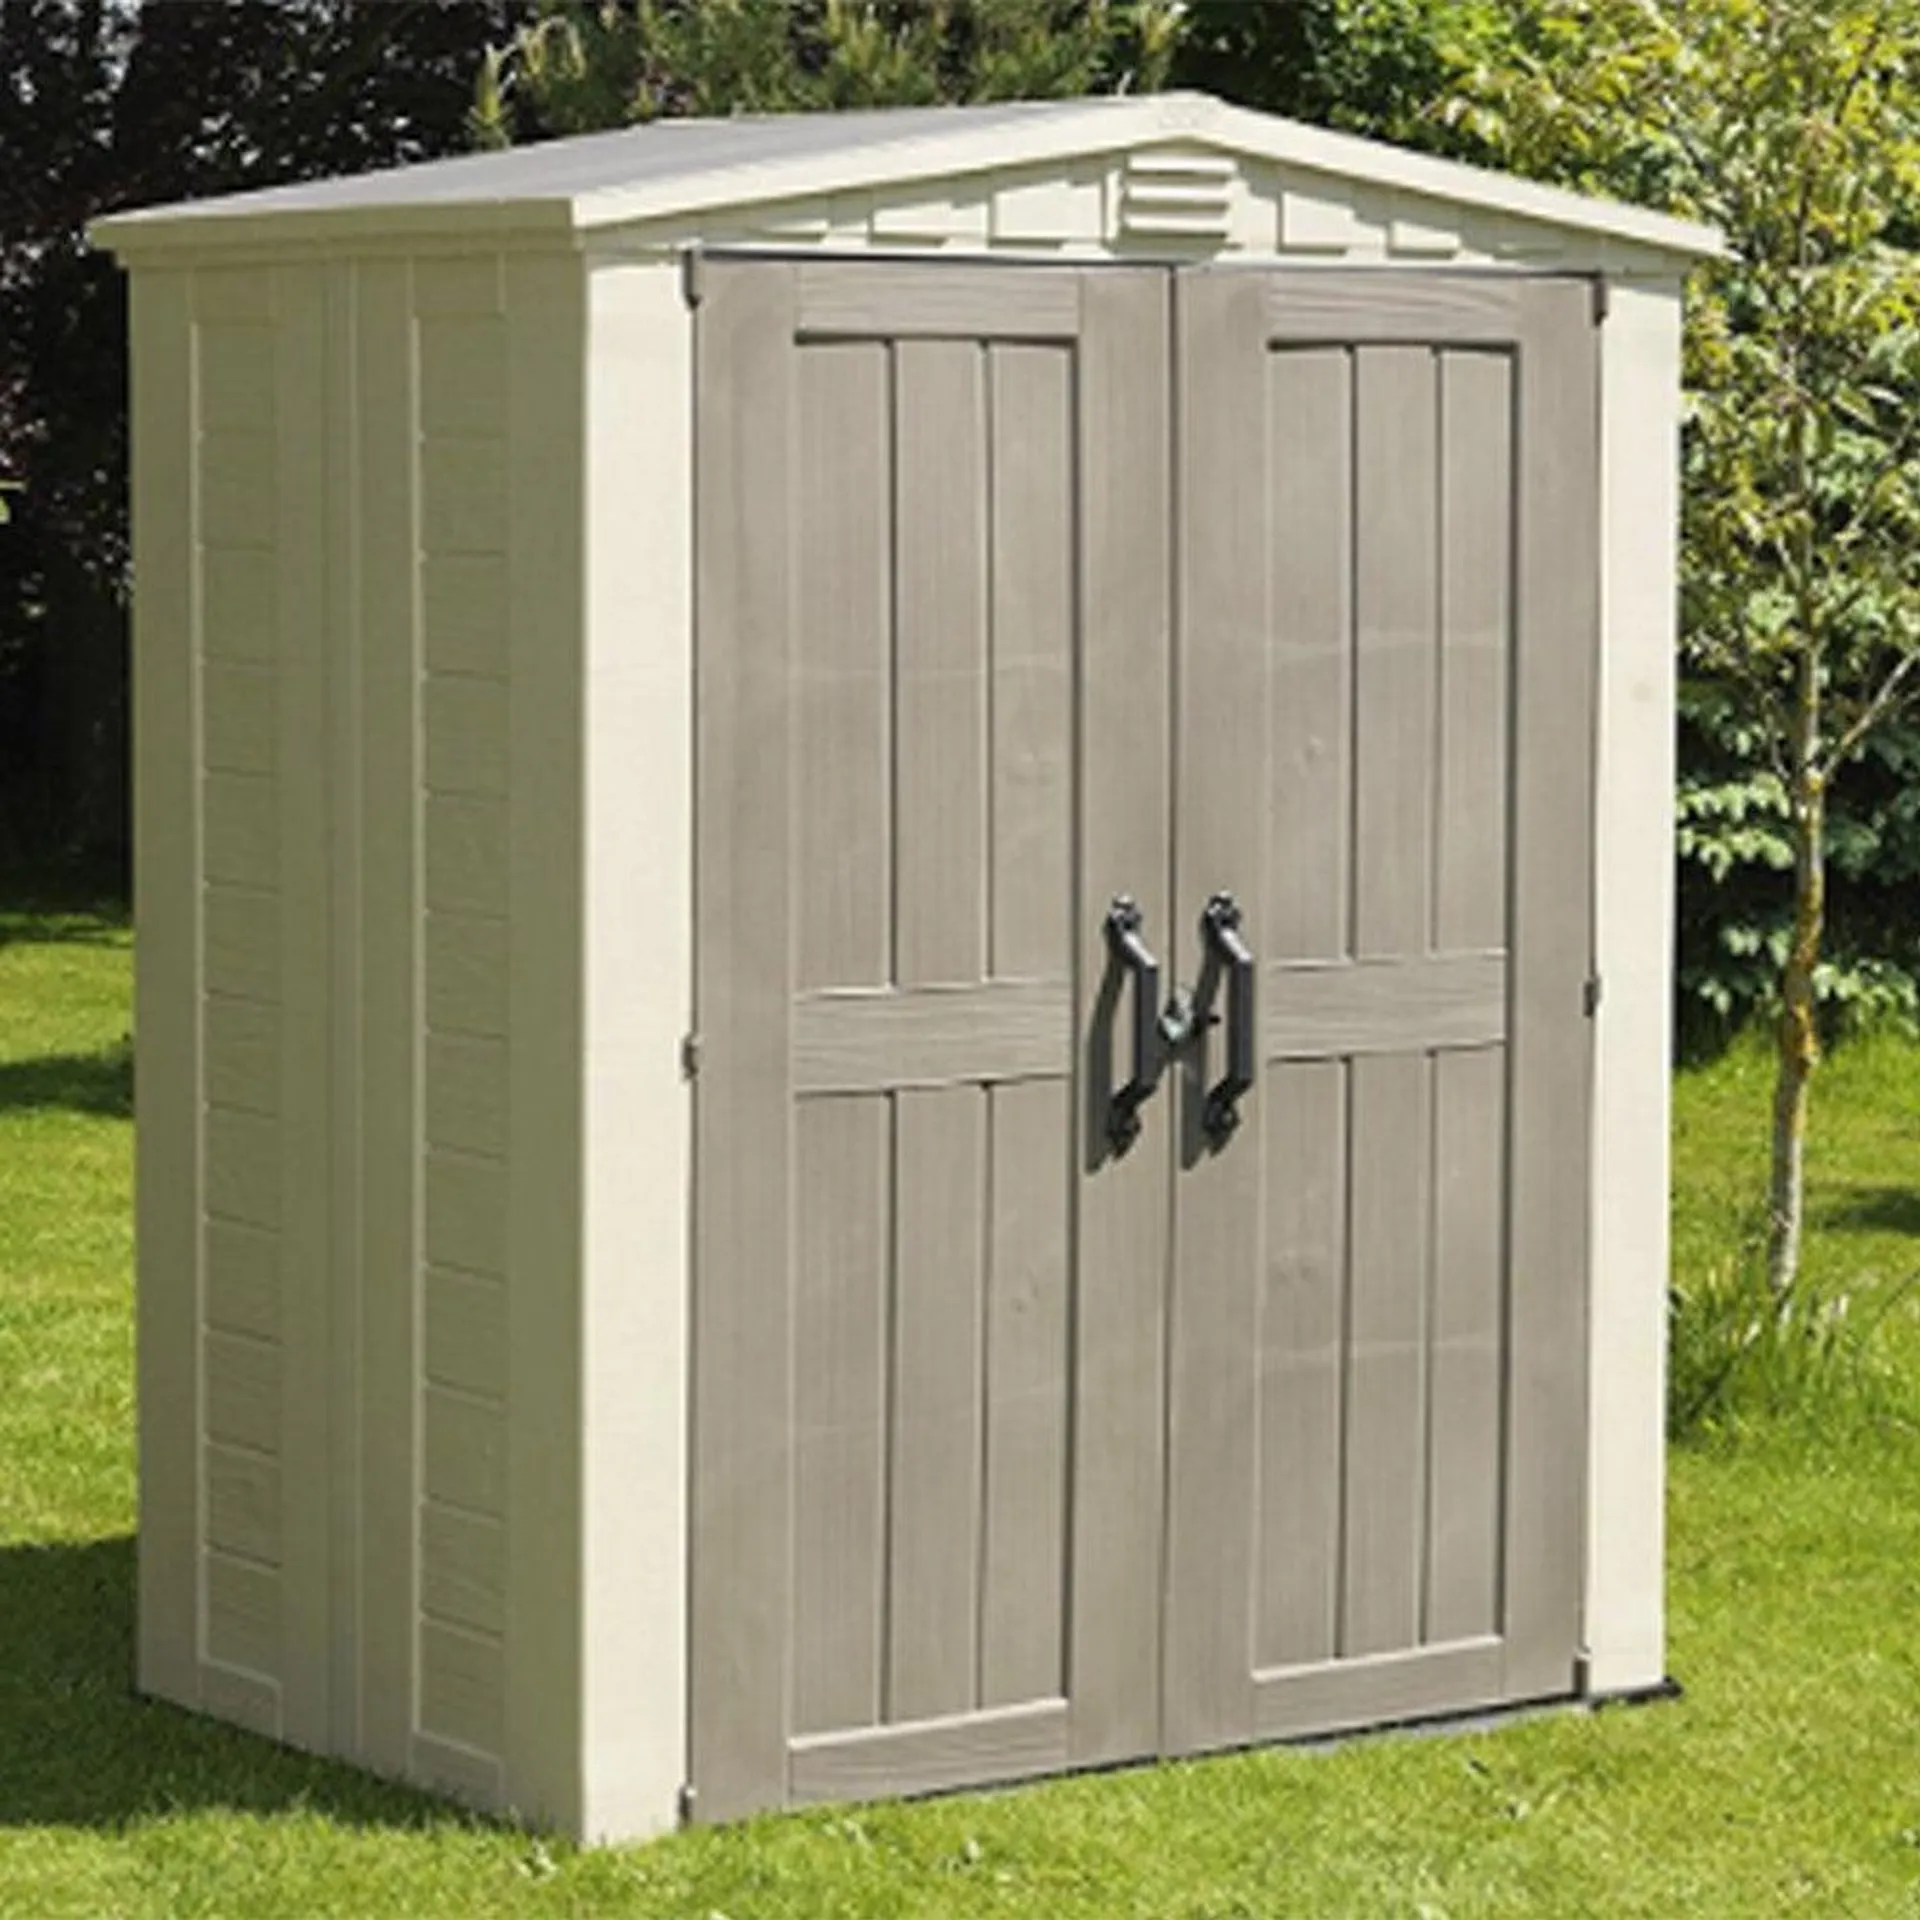 Keter Outdoor Shed 6x3 1780mm x 1135mm